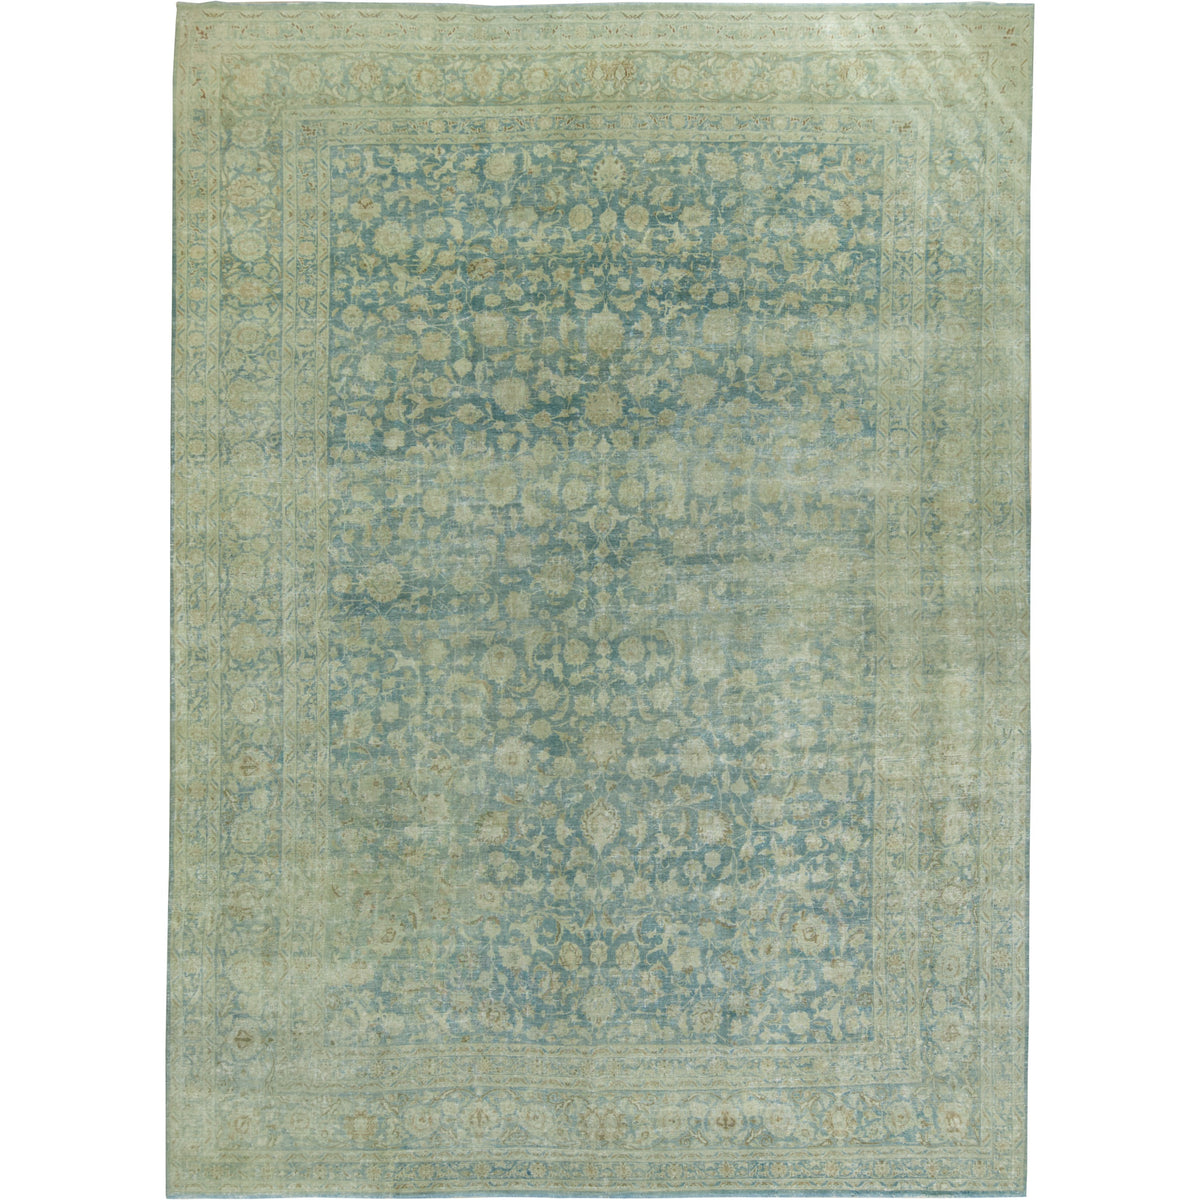 Rayna - Vintage Turkish Rug, Elevating Your Floors with Timeless Beauty | Kuden Rugs